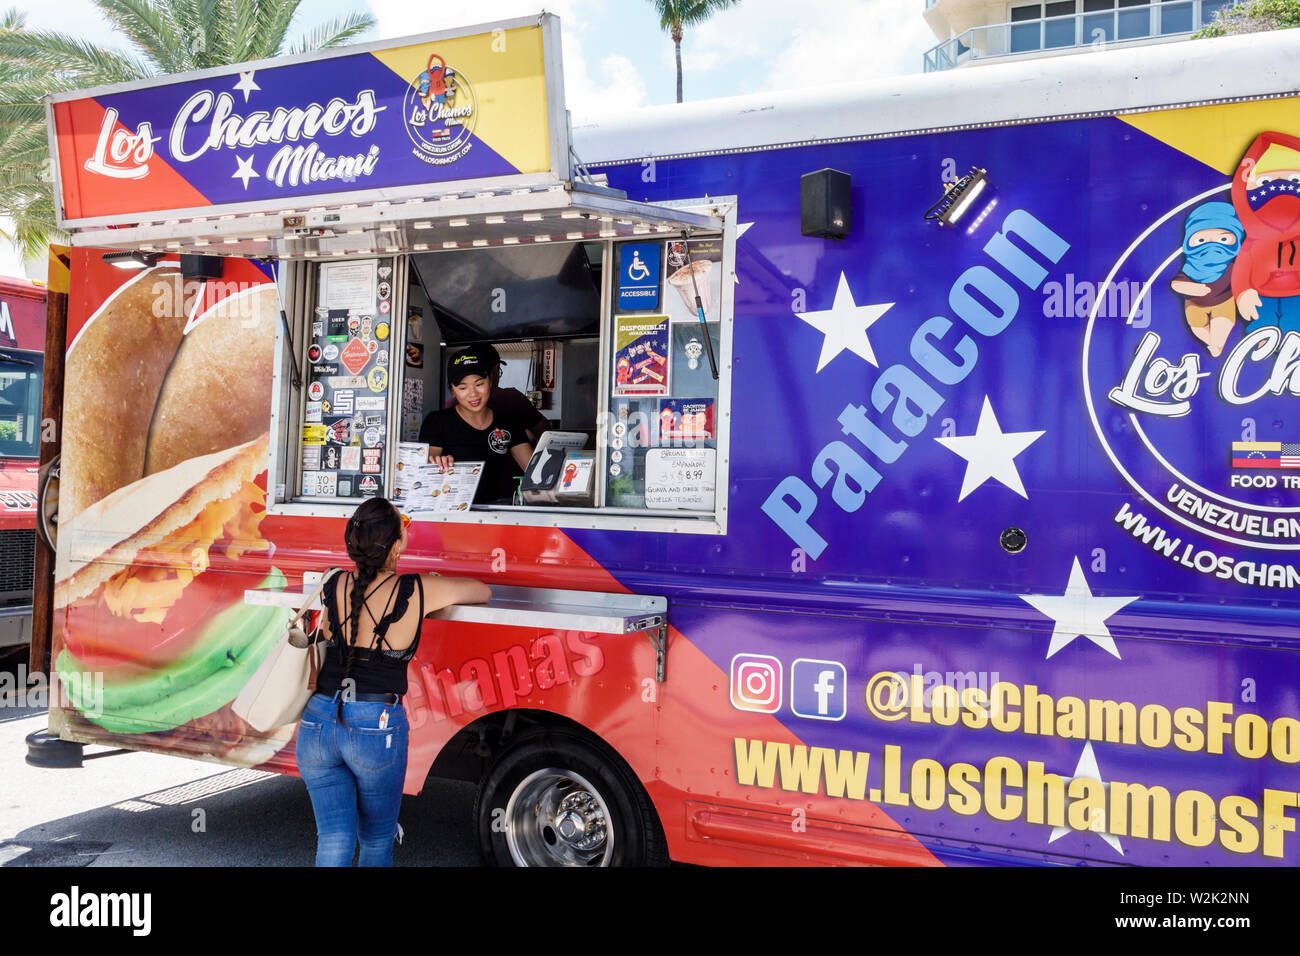 Miami Beach Florida,North Beach,Fire on the Fourth Festival 4 juillet annuel camions alimentaires clients guichet, FL190704031 Banque D'Images